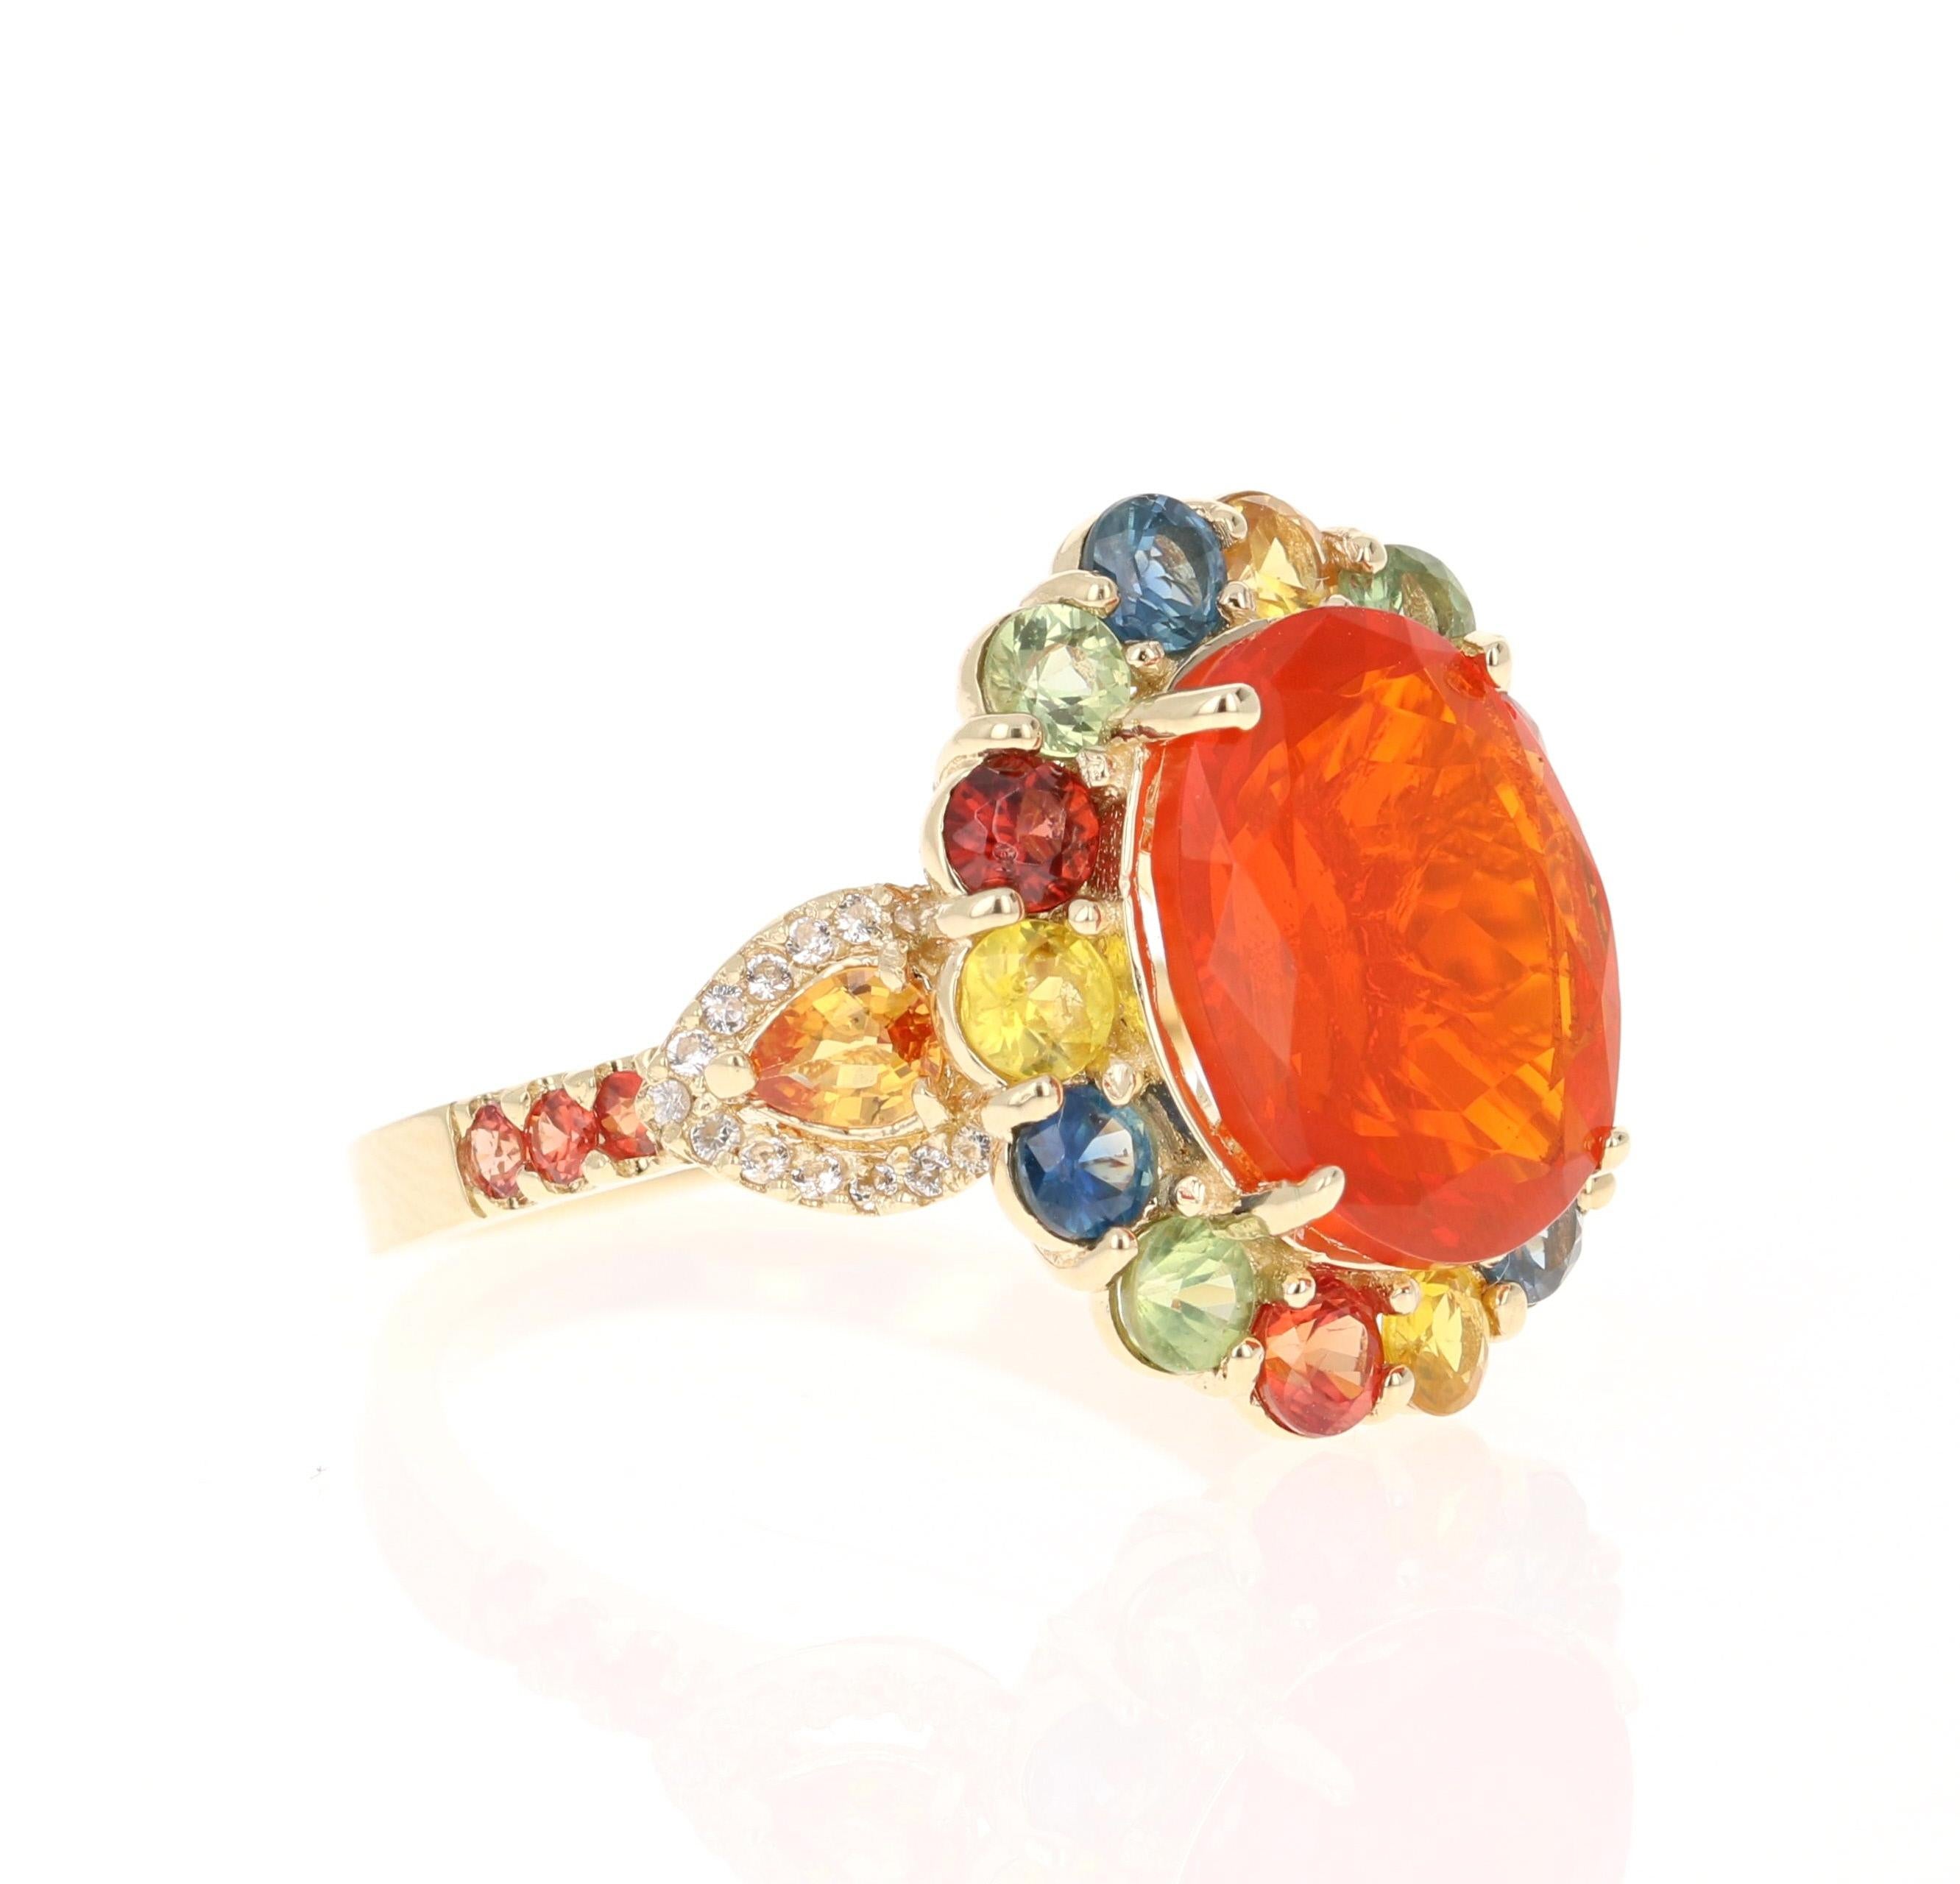 This ring has a 3.94 carat Oval Cut Fire Opal as its center stone and is elegantly surrounded by 22 Multi-Colored Sapphires that weigh 2.62 Carats and 30 Round Cut White Sapphires that weigh 0.16 carats. The measurements of the Fire Opal are 10mm x